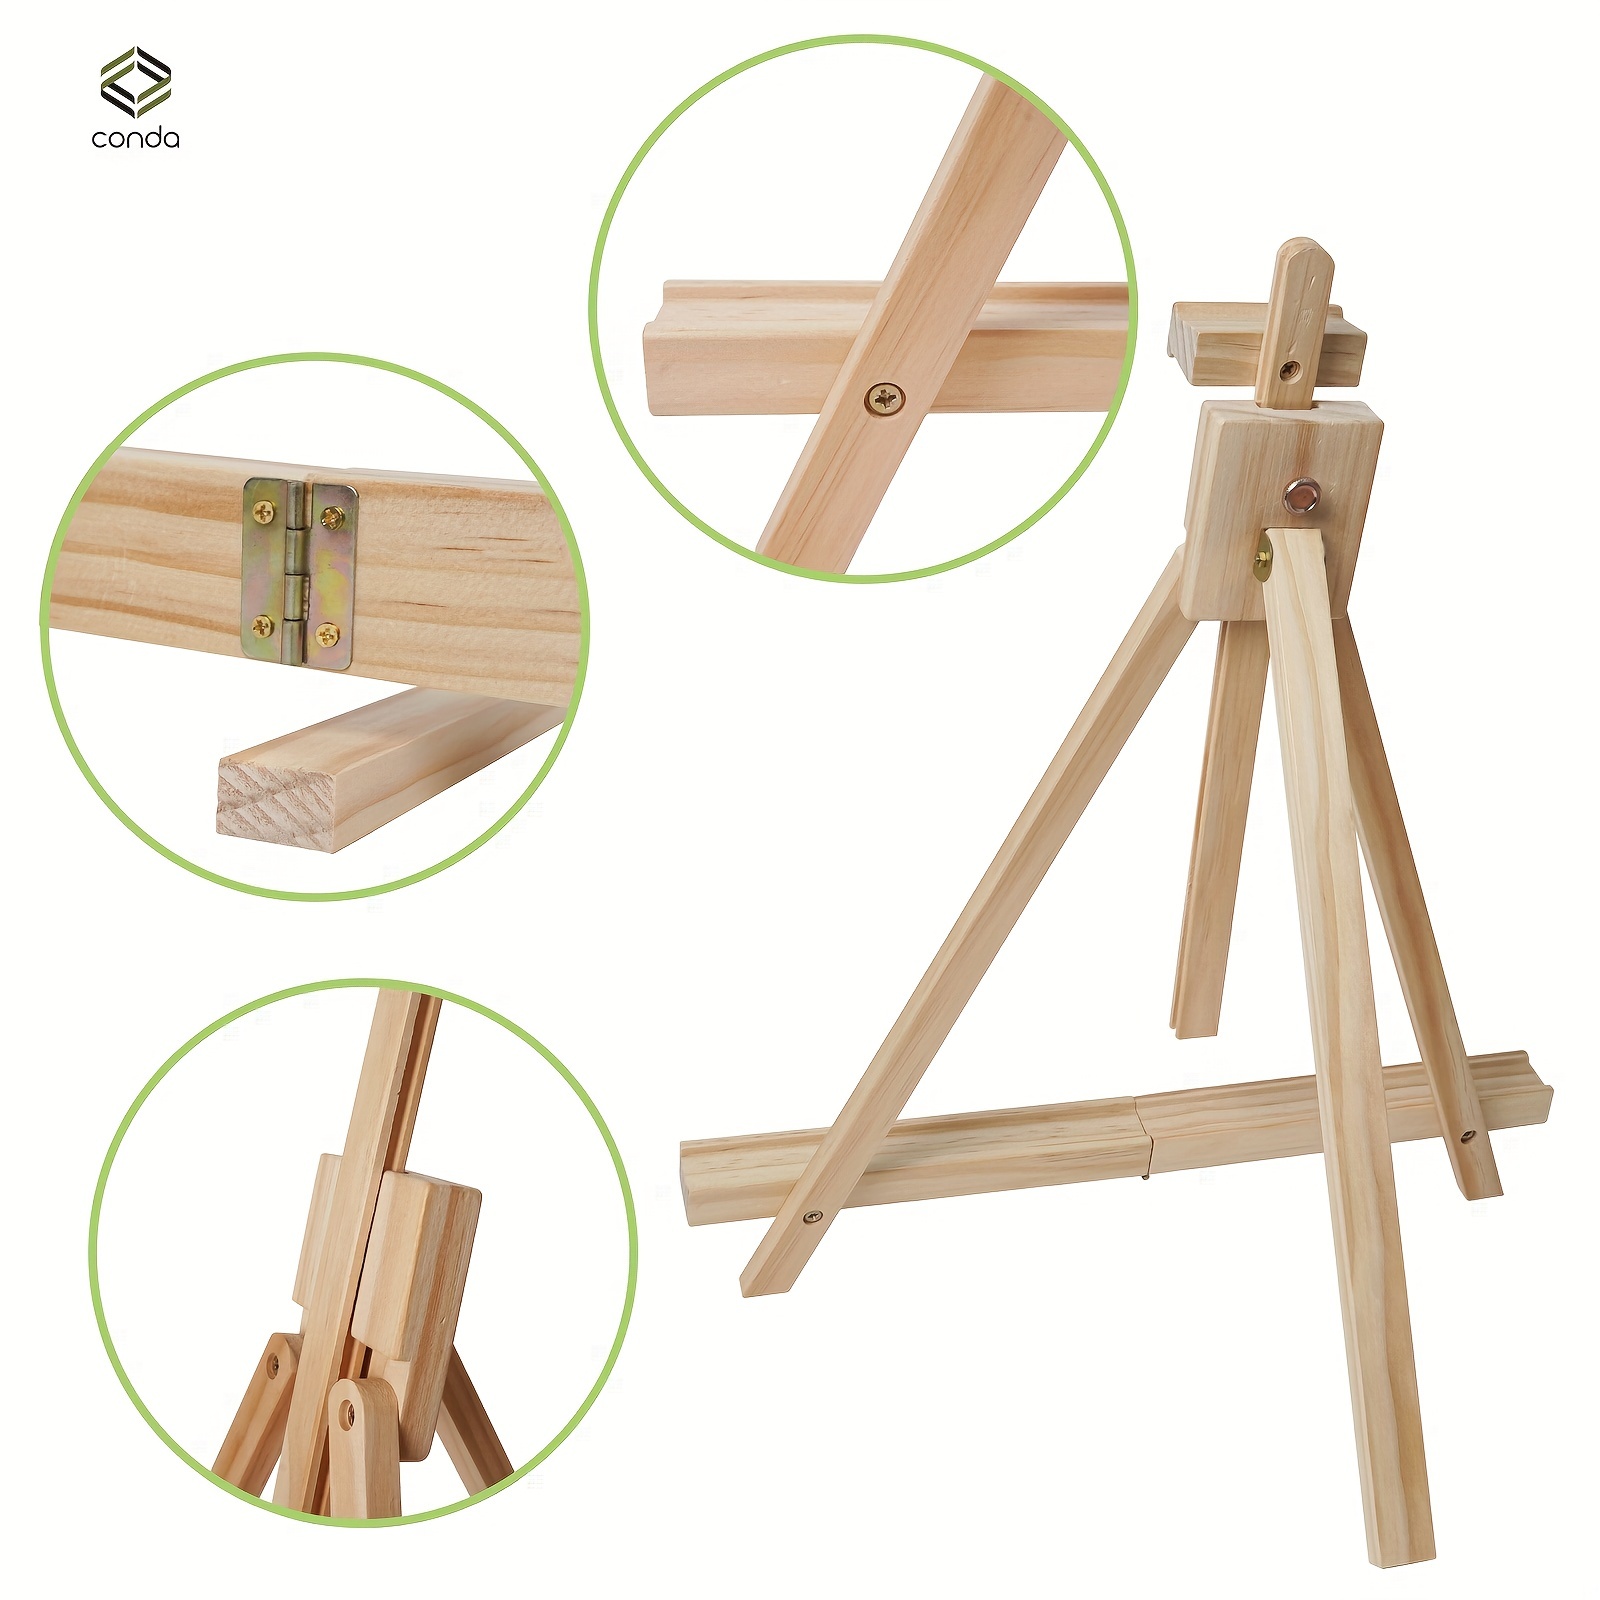 Wooden Drawing Easel Tablet Phone Stand Frame Painting Art Tripod Display  ShBKE